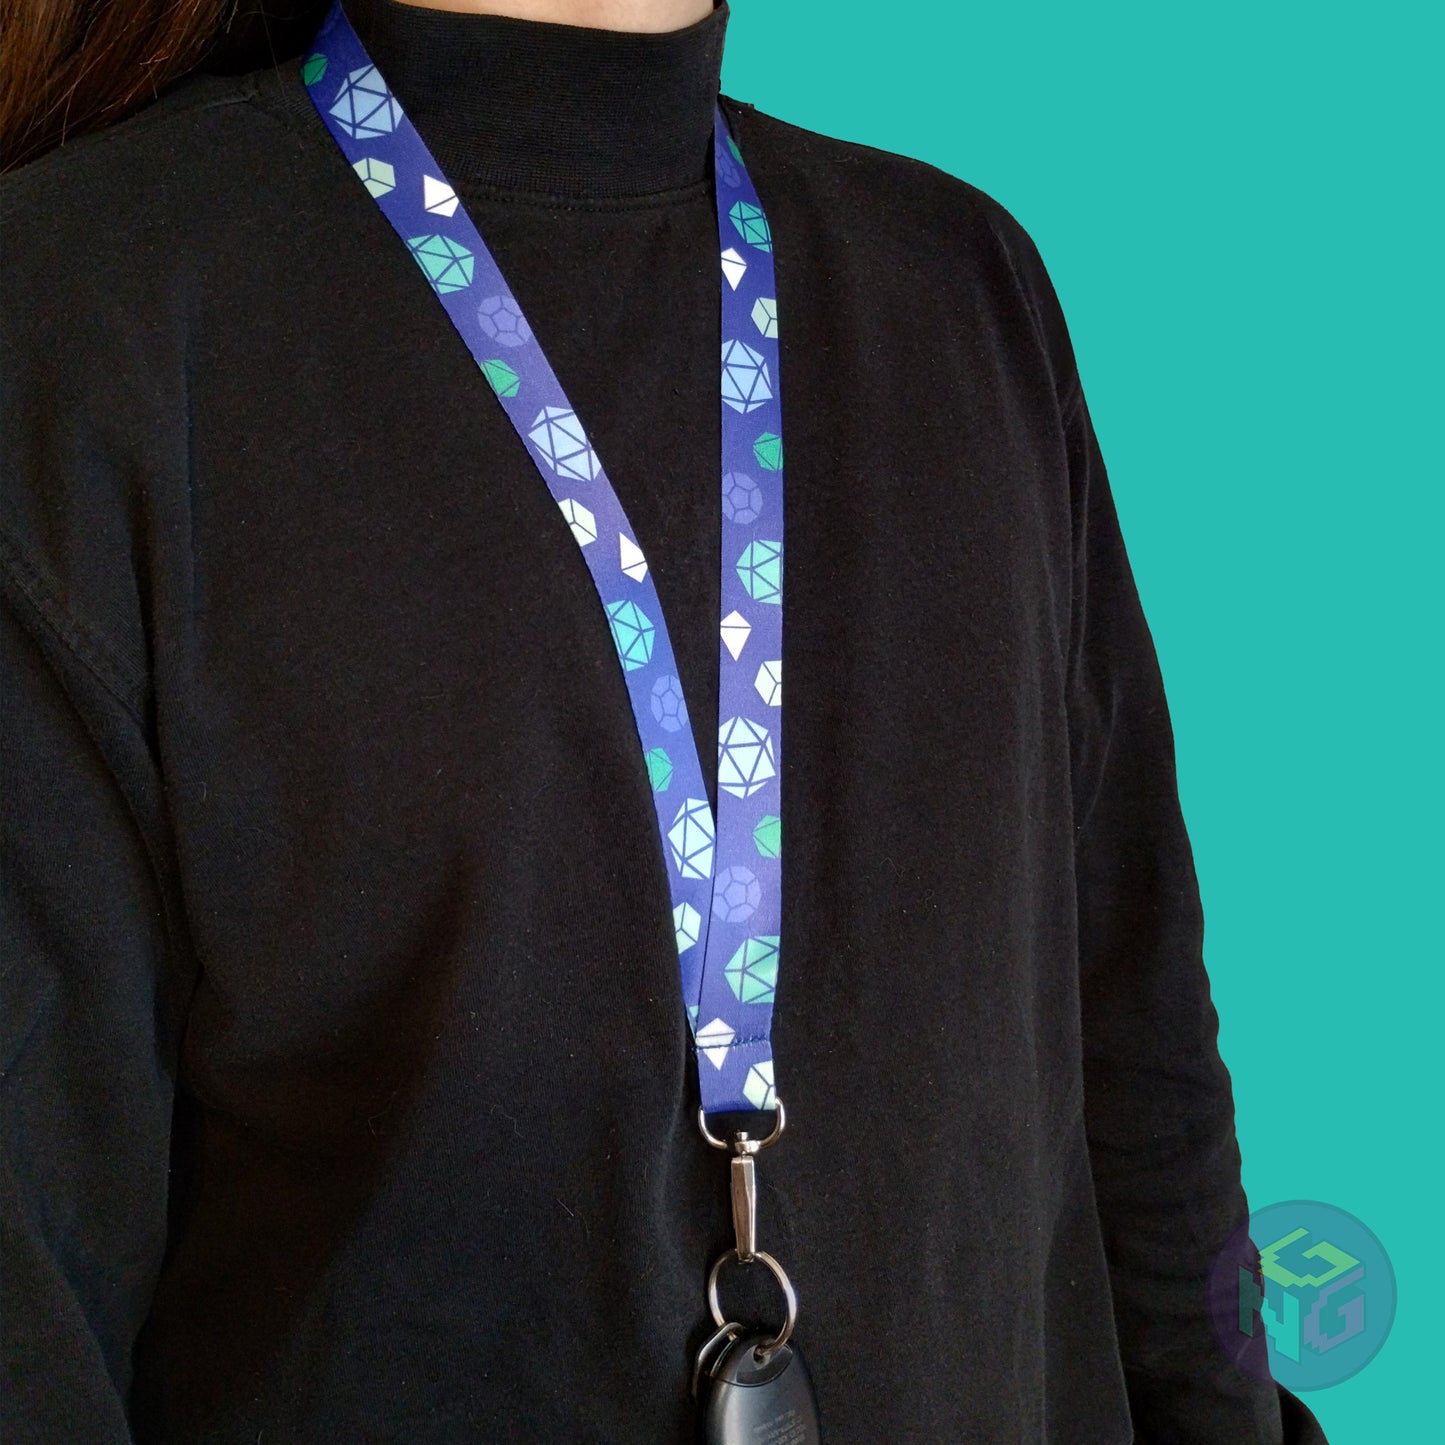 blue gay mlm pride lanyard being worn by a flat chested person wearing a black turtleneck. The end of the lanyard falls between their sternum and bellybutton and has a key fob clipped to the end